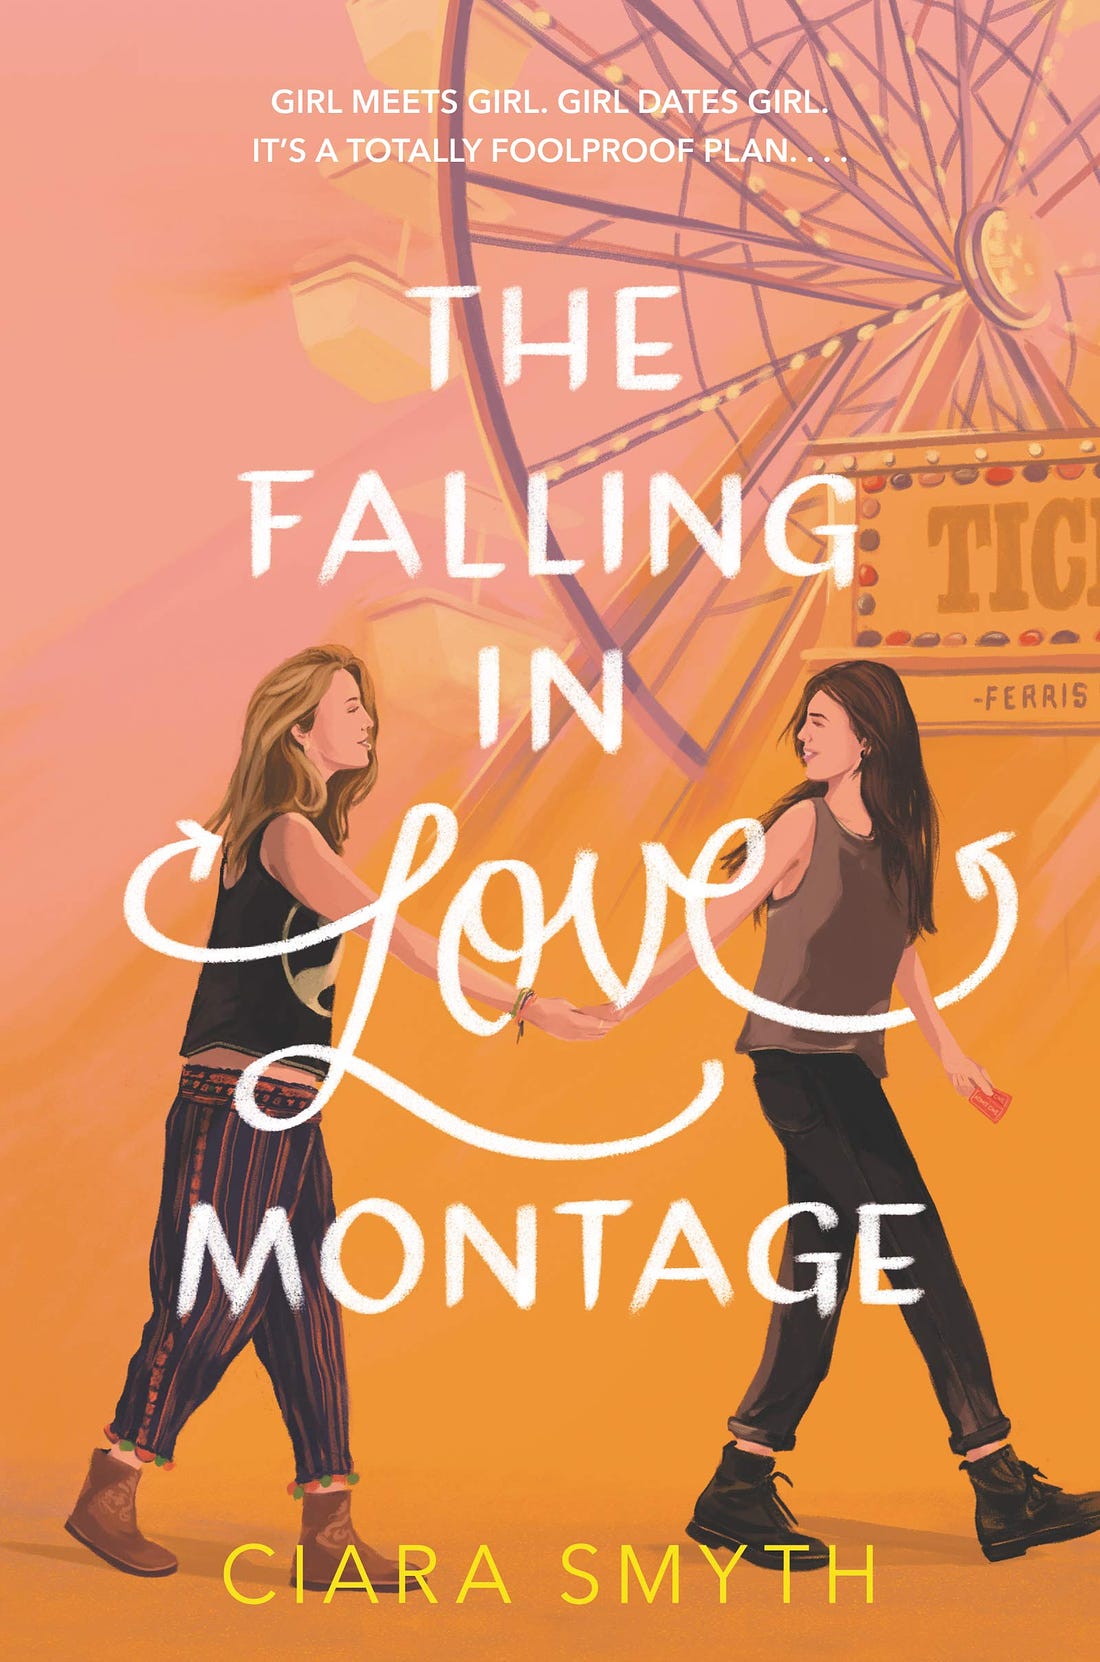 Cover of The Falling in Love Montage